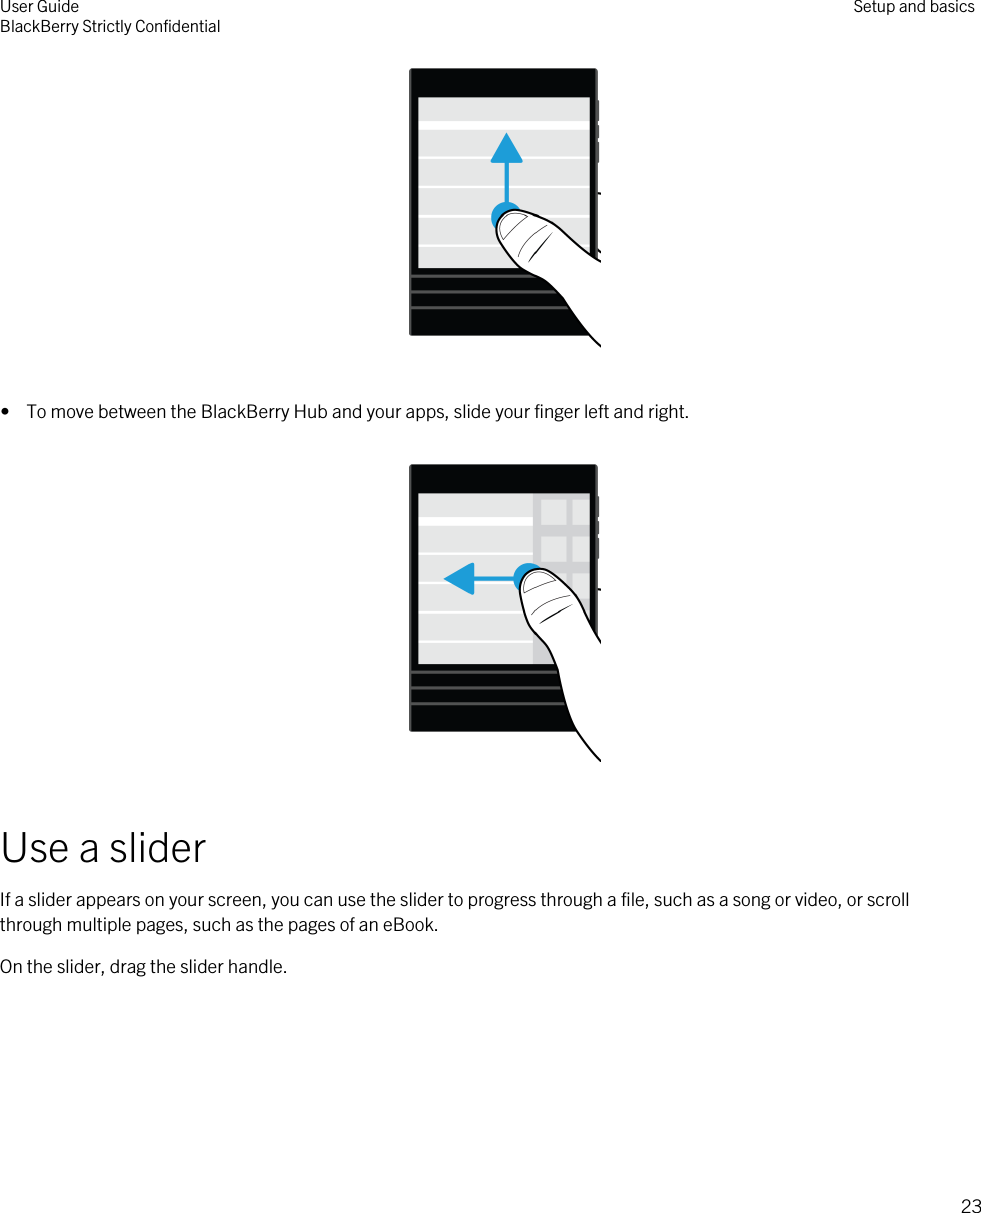  •  To move between the BlackBerry Hub and your apps, slide your finger left and right.  Use a sliderIf a slider appears on your screen, you can use the slider to progress through a file, such as a song or video, or scroll through multiple pages, such as the pages of an eBook.On the slider, drag the slider handle. User GuideBlackBerry Strictly Confidential Setup and basics23